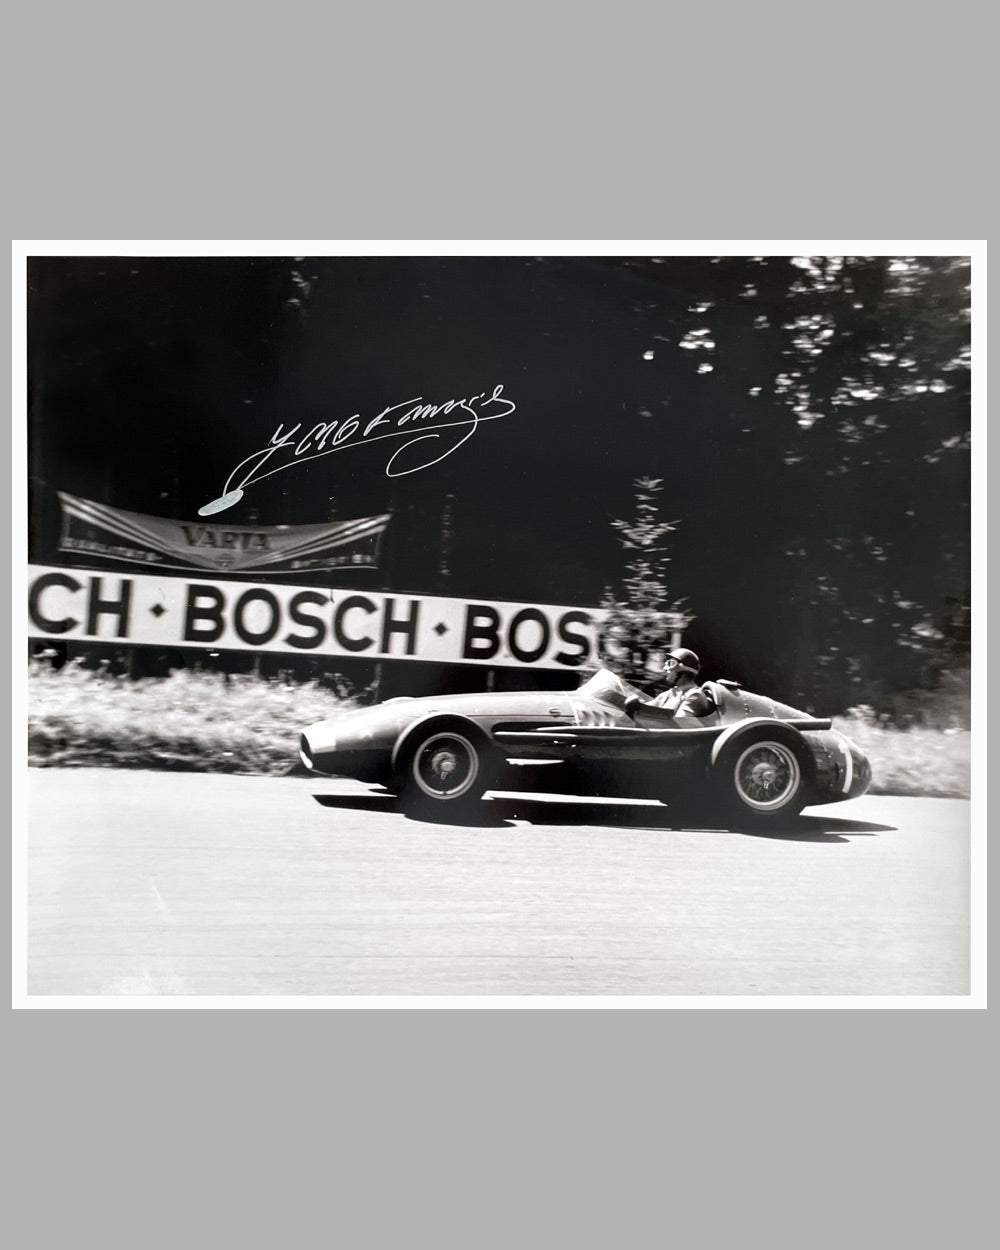 Fangio’s greatest victory autographed b&w photograph